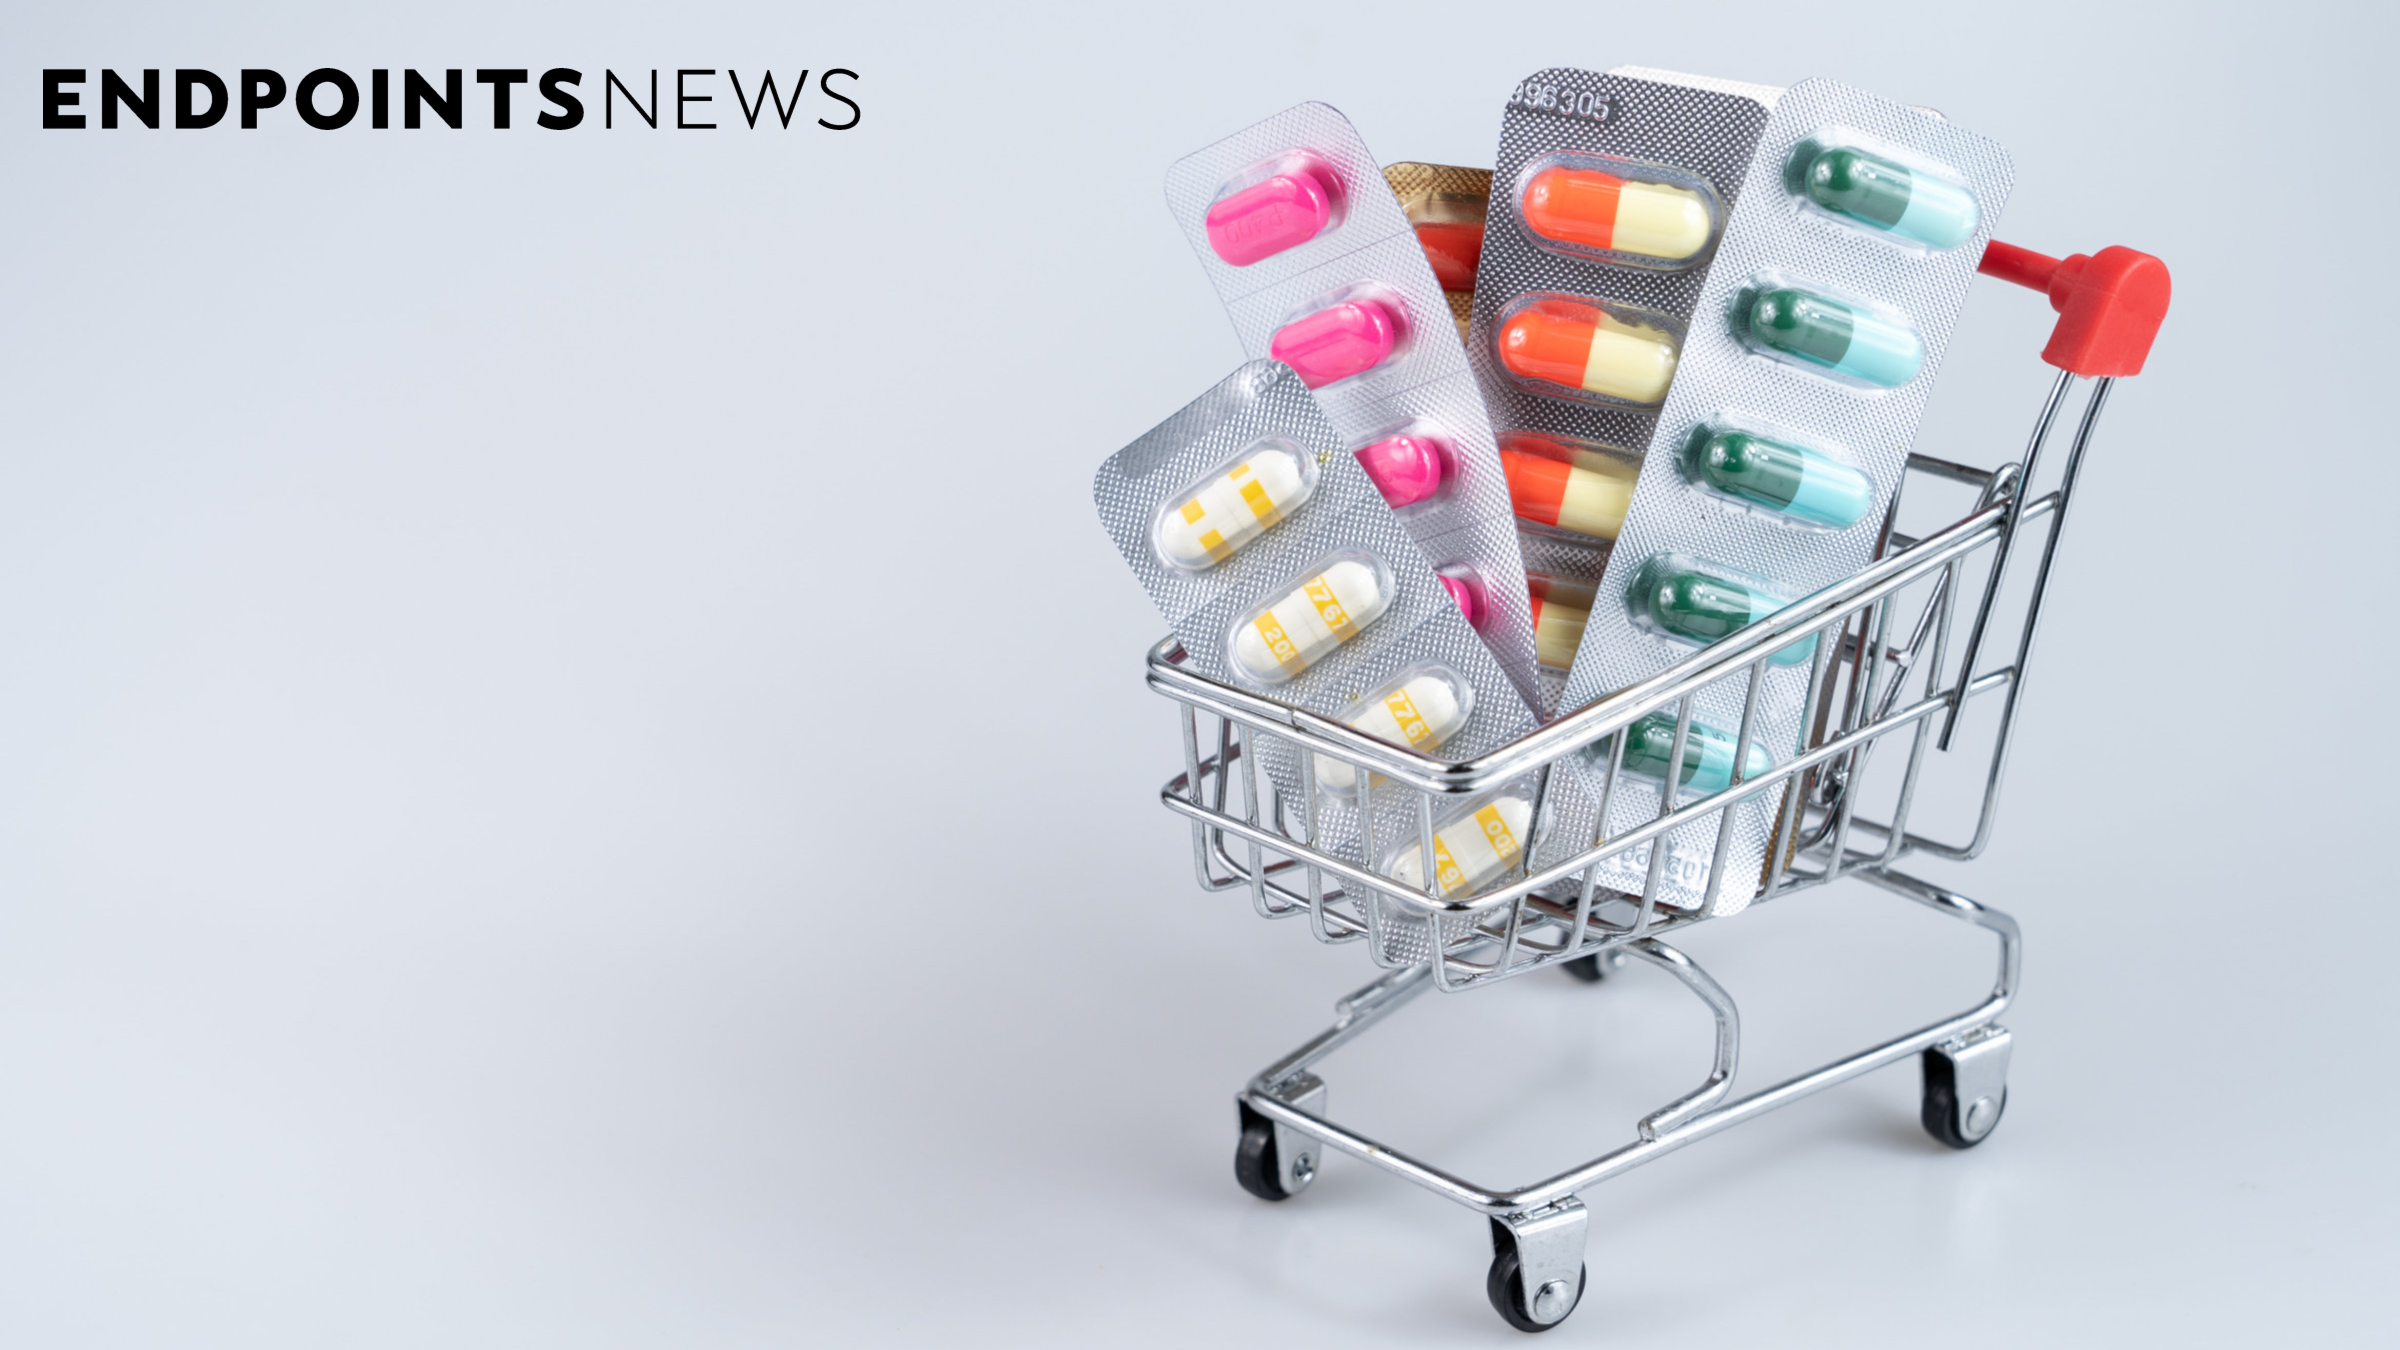 Brands in demand Keytruda, Dupixent and Ozempic lead 2023 new sales